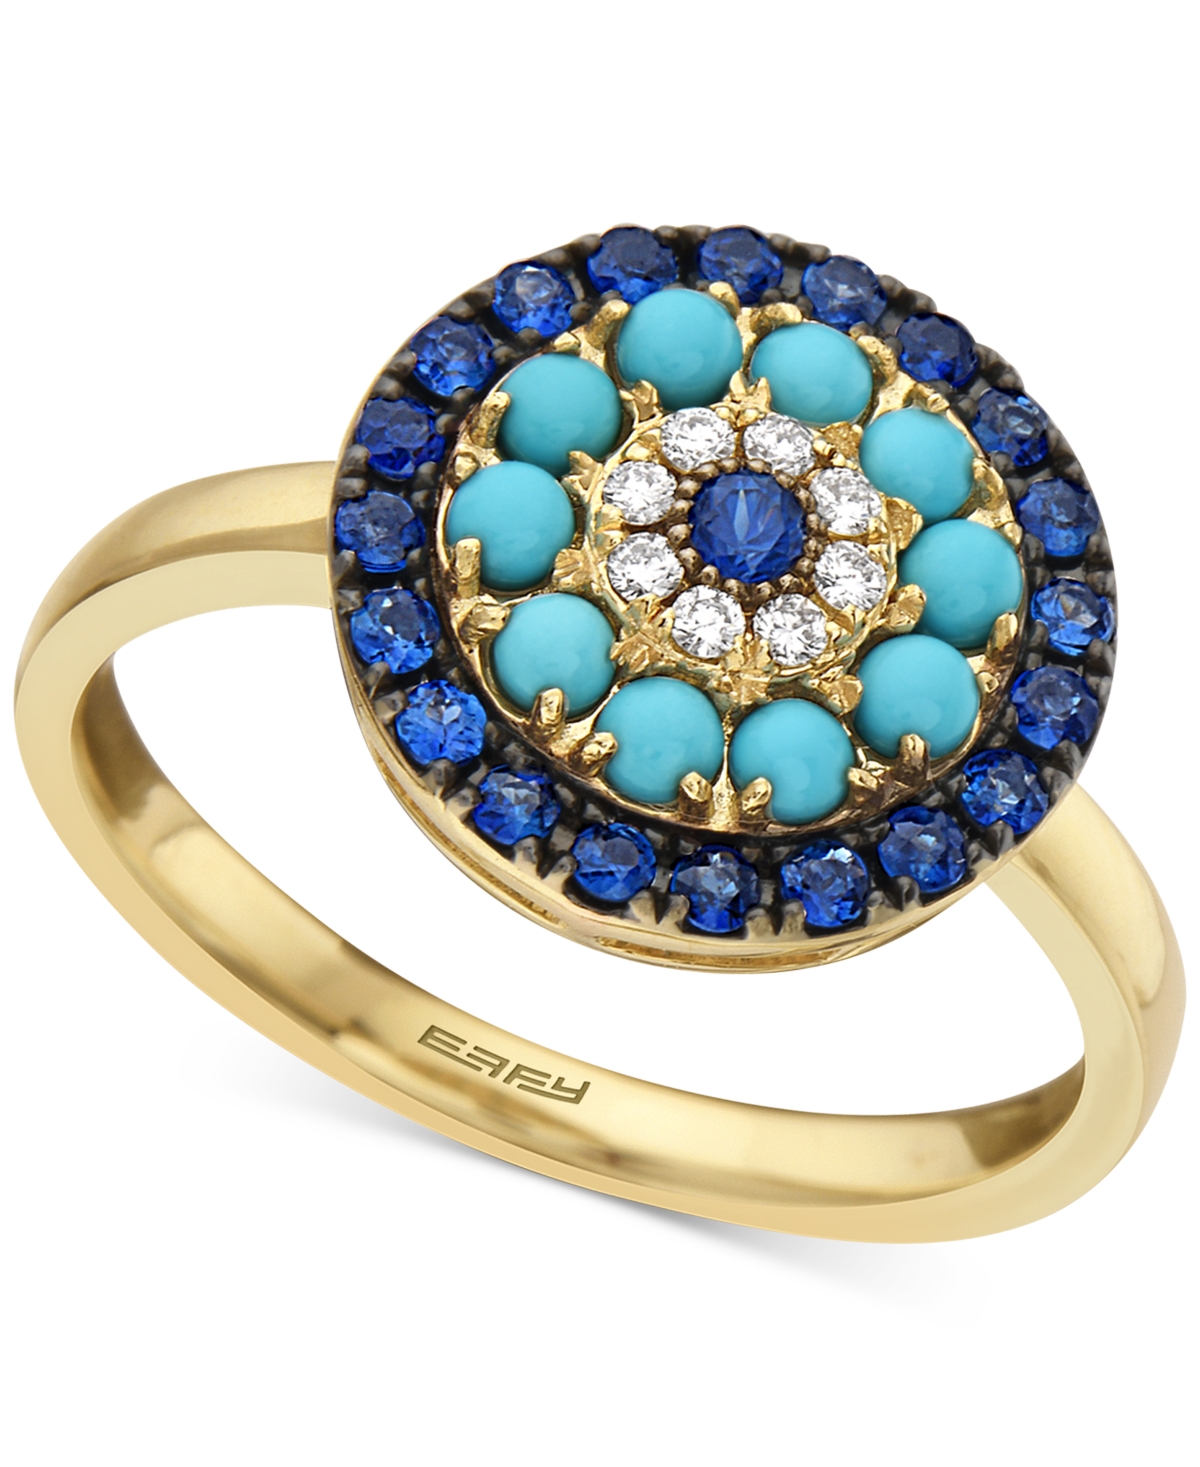 Effy Collection Effy Sapphire (1/2 ct. t.w.), Turqouise & Diamond (1/20 ct. t.w.) Statement Ring in 14k Gold